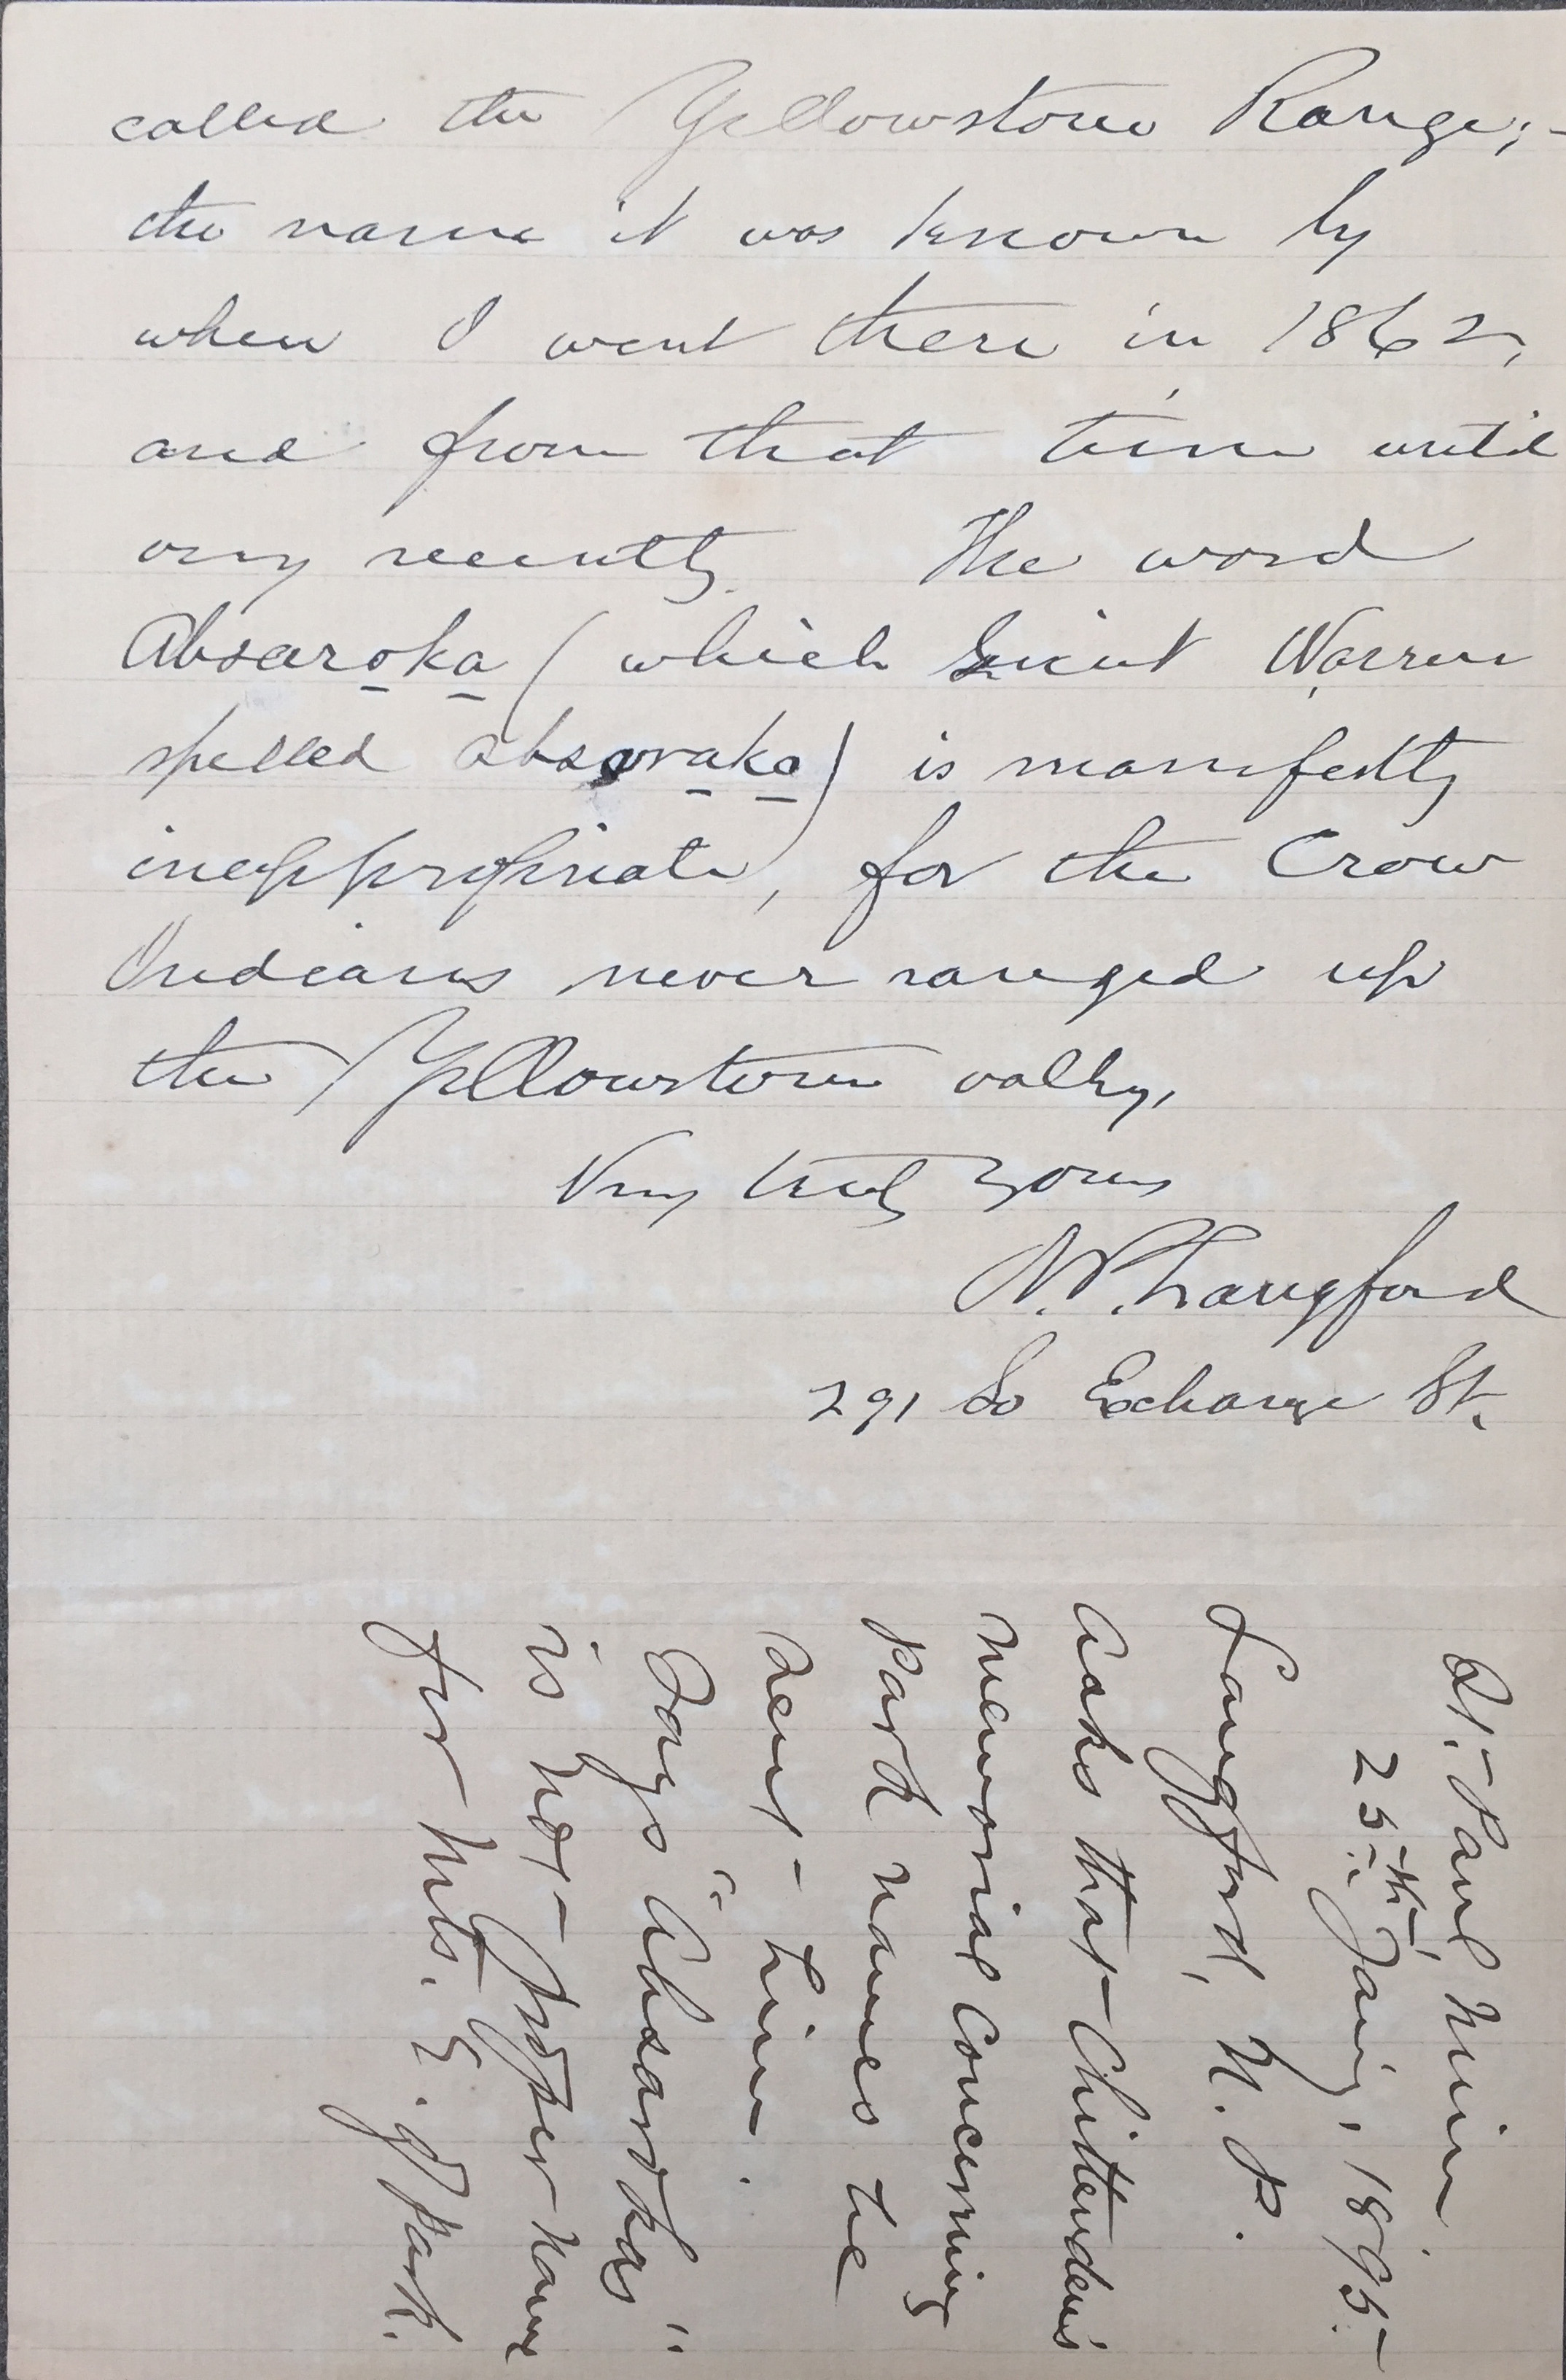 January 25, 1895 Letter written by Langford to Acting Army Superintendent George Anderson, concerning Chittenden and the naming of the mountains on the east side of the park